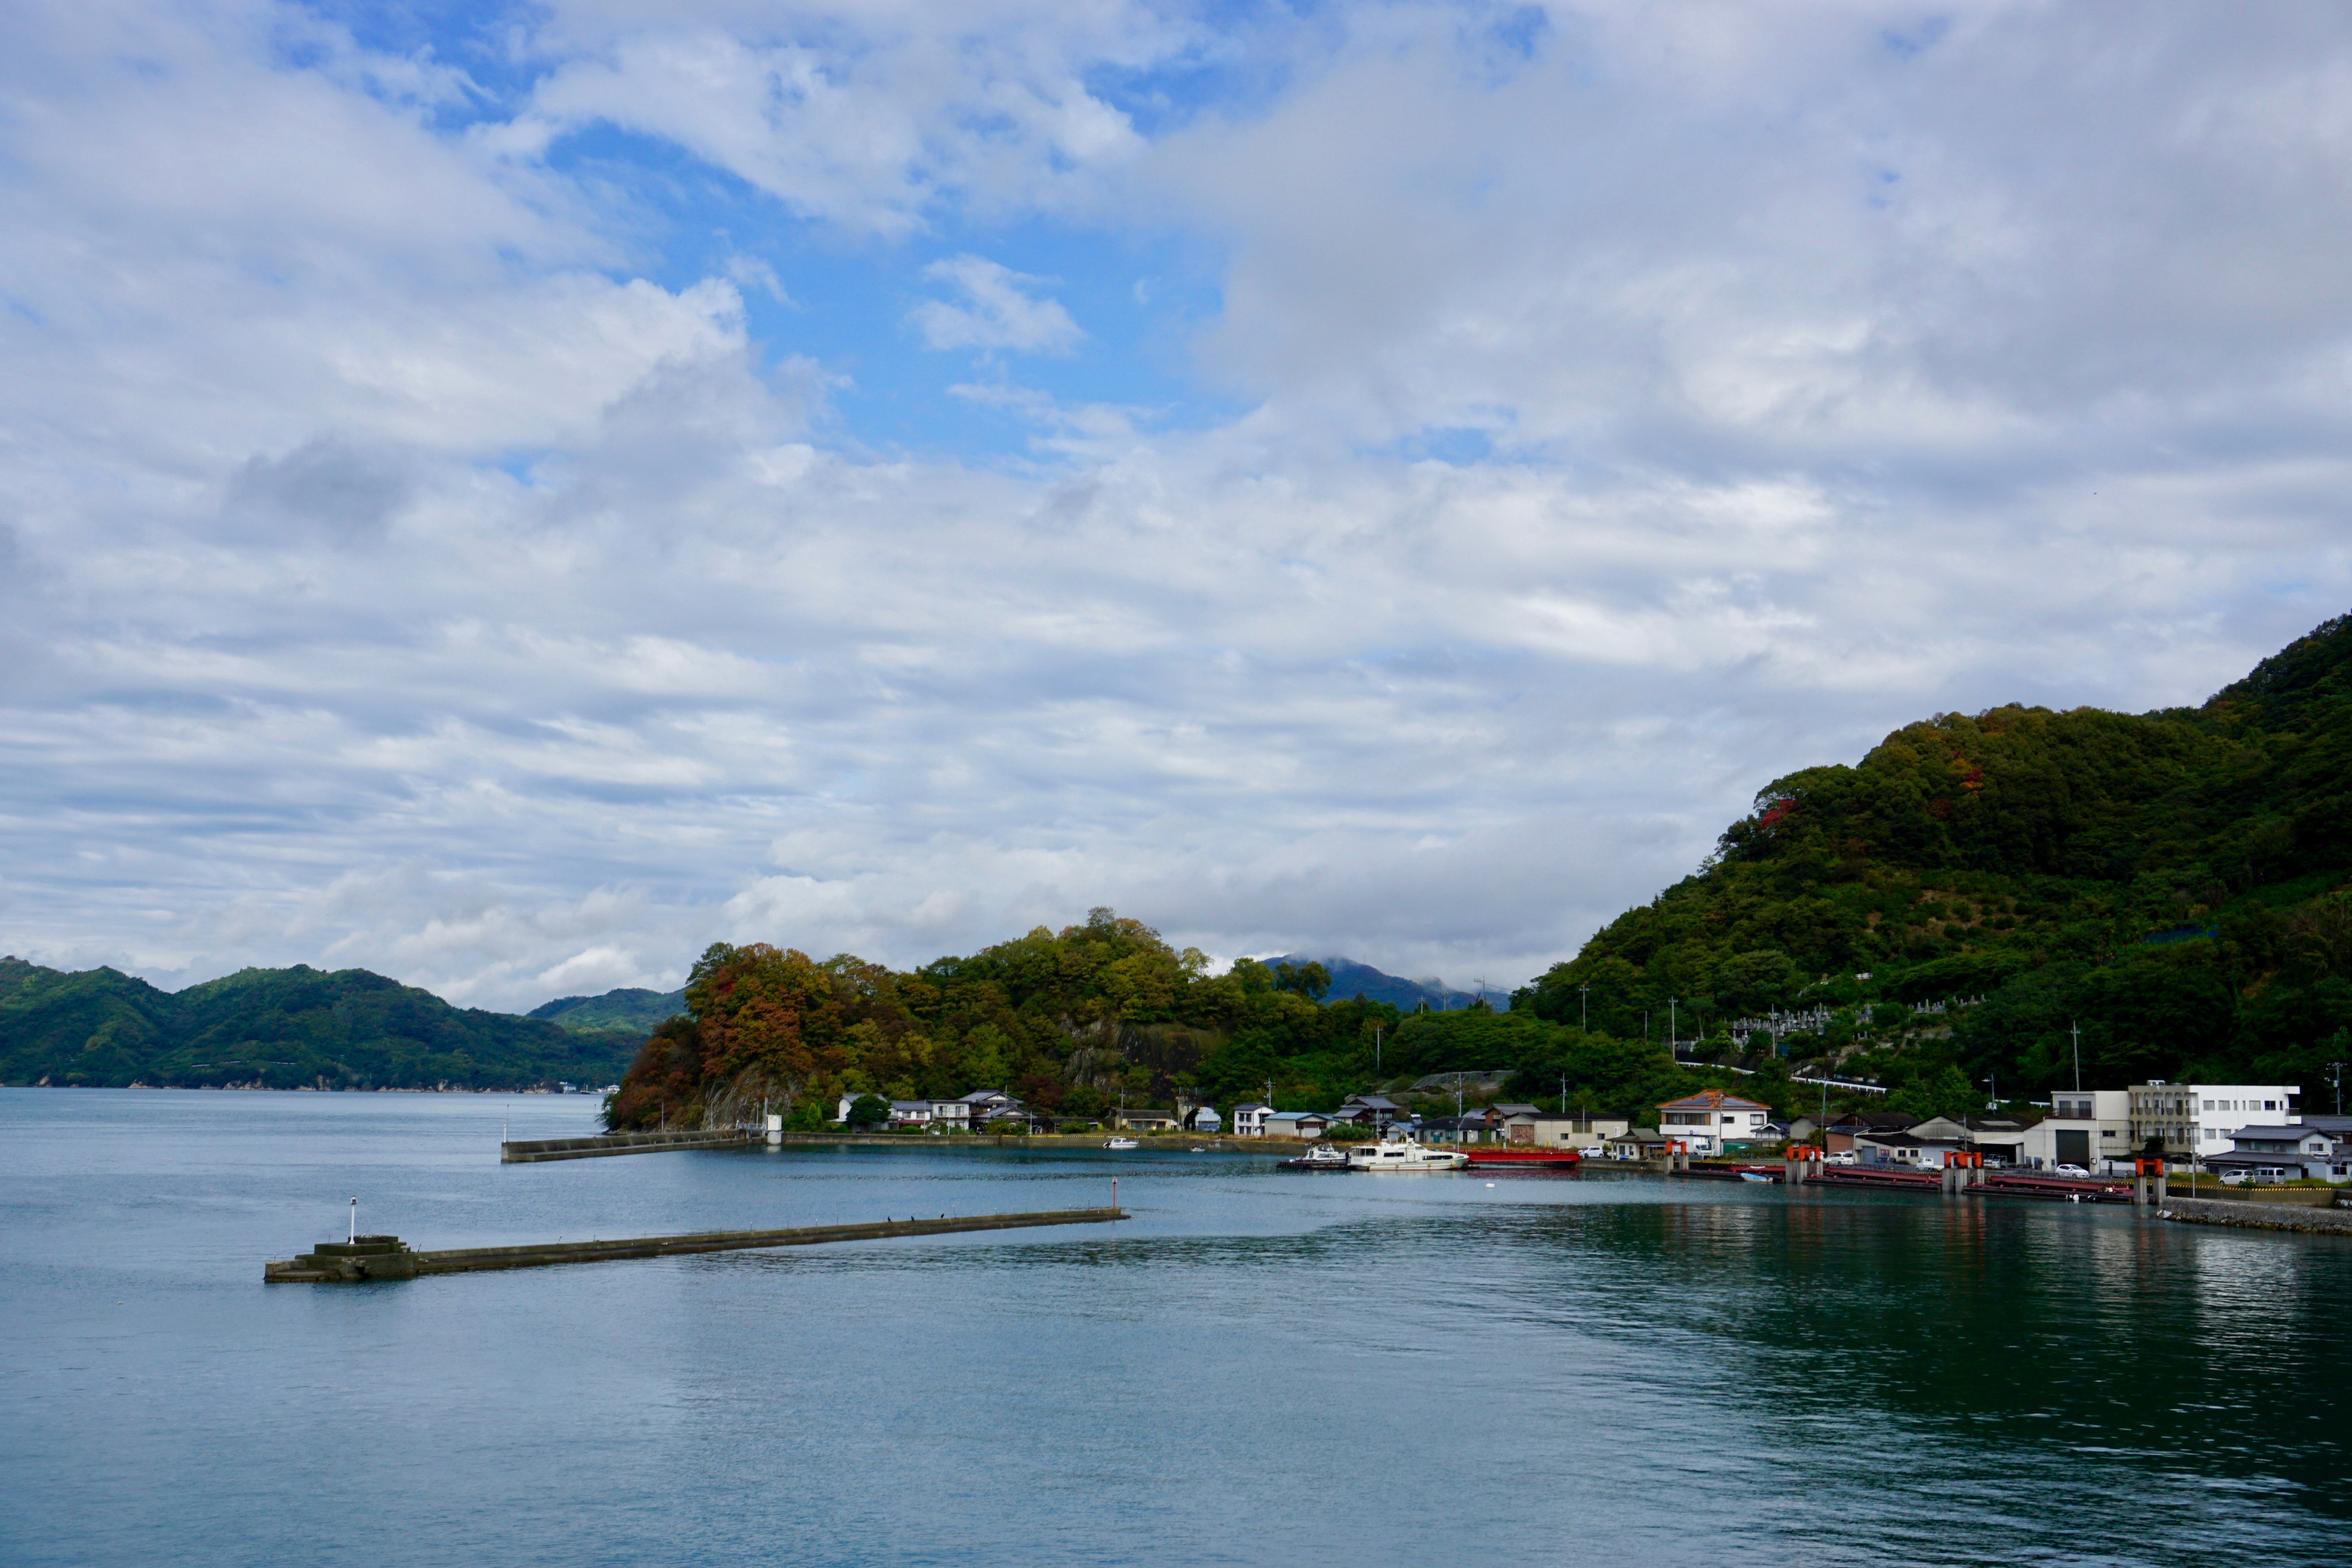 The island of Osakishimojima is covered thickly in green trees, some of which are just starting to turn over to autumnal colors. The vegetation reaches all the way down to the blue waters of the Seto Inland Sea except where there are small white buildings and boats, and red pylons along the coast.